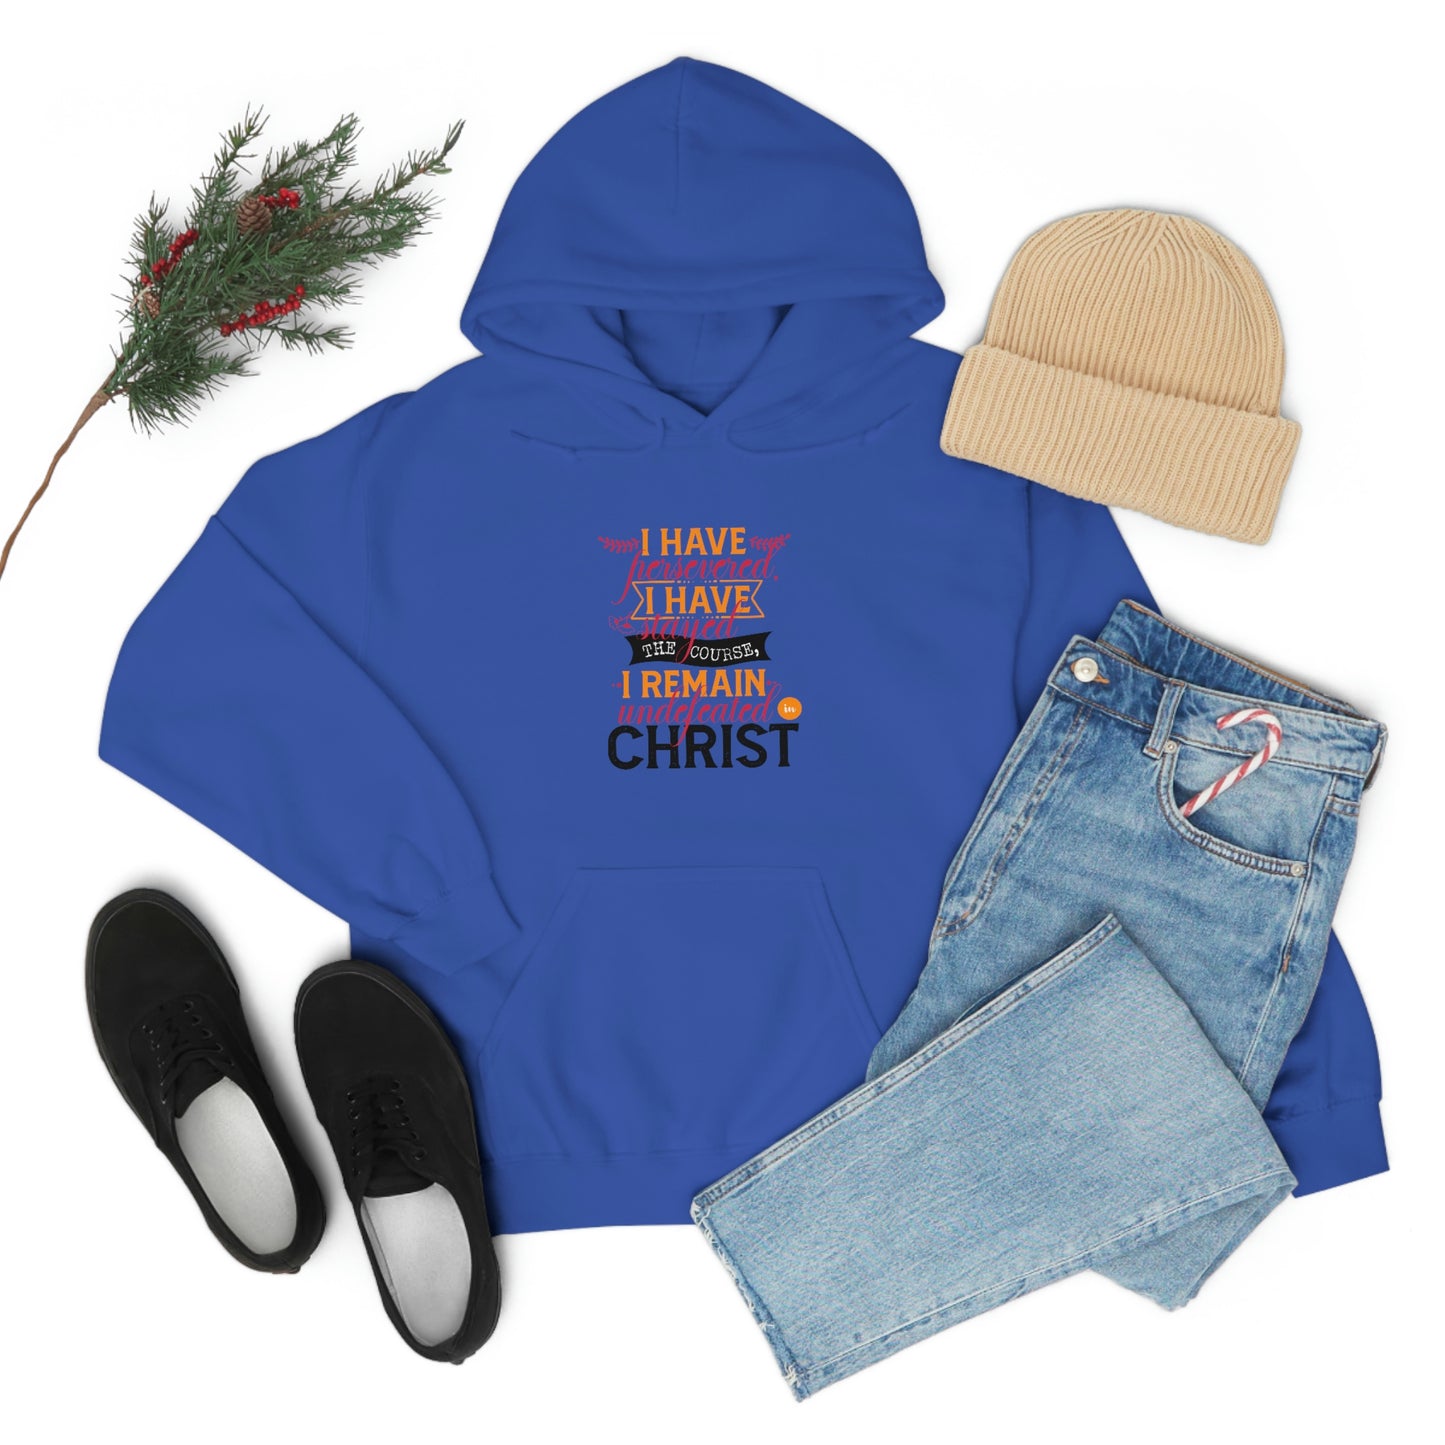 I Have Persevered I Have Stayed The Course I Remain Undefeated In Christ Unisex Pull On Hooded sweatshirt Printify